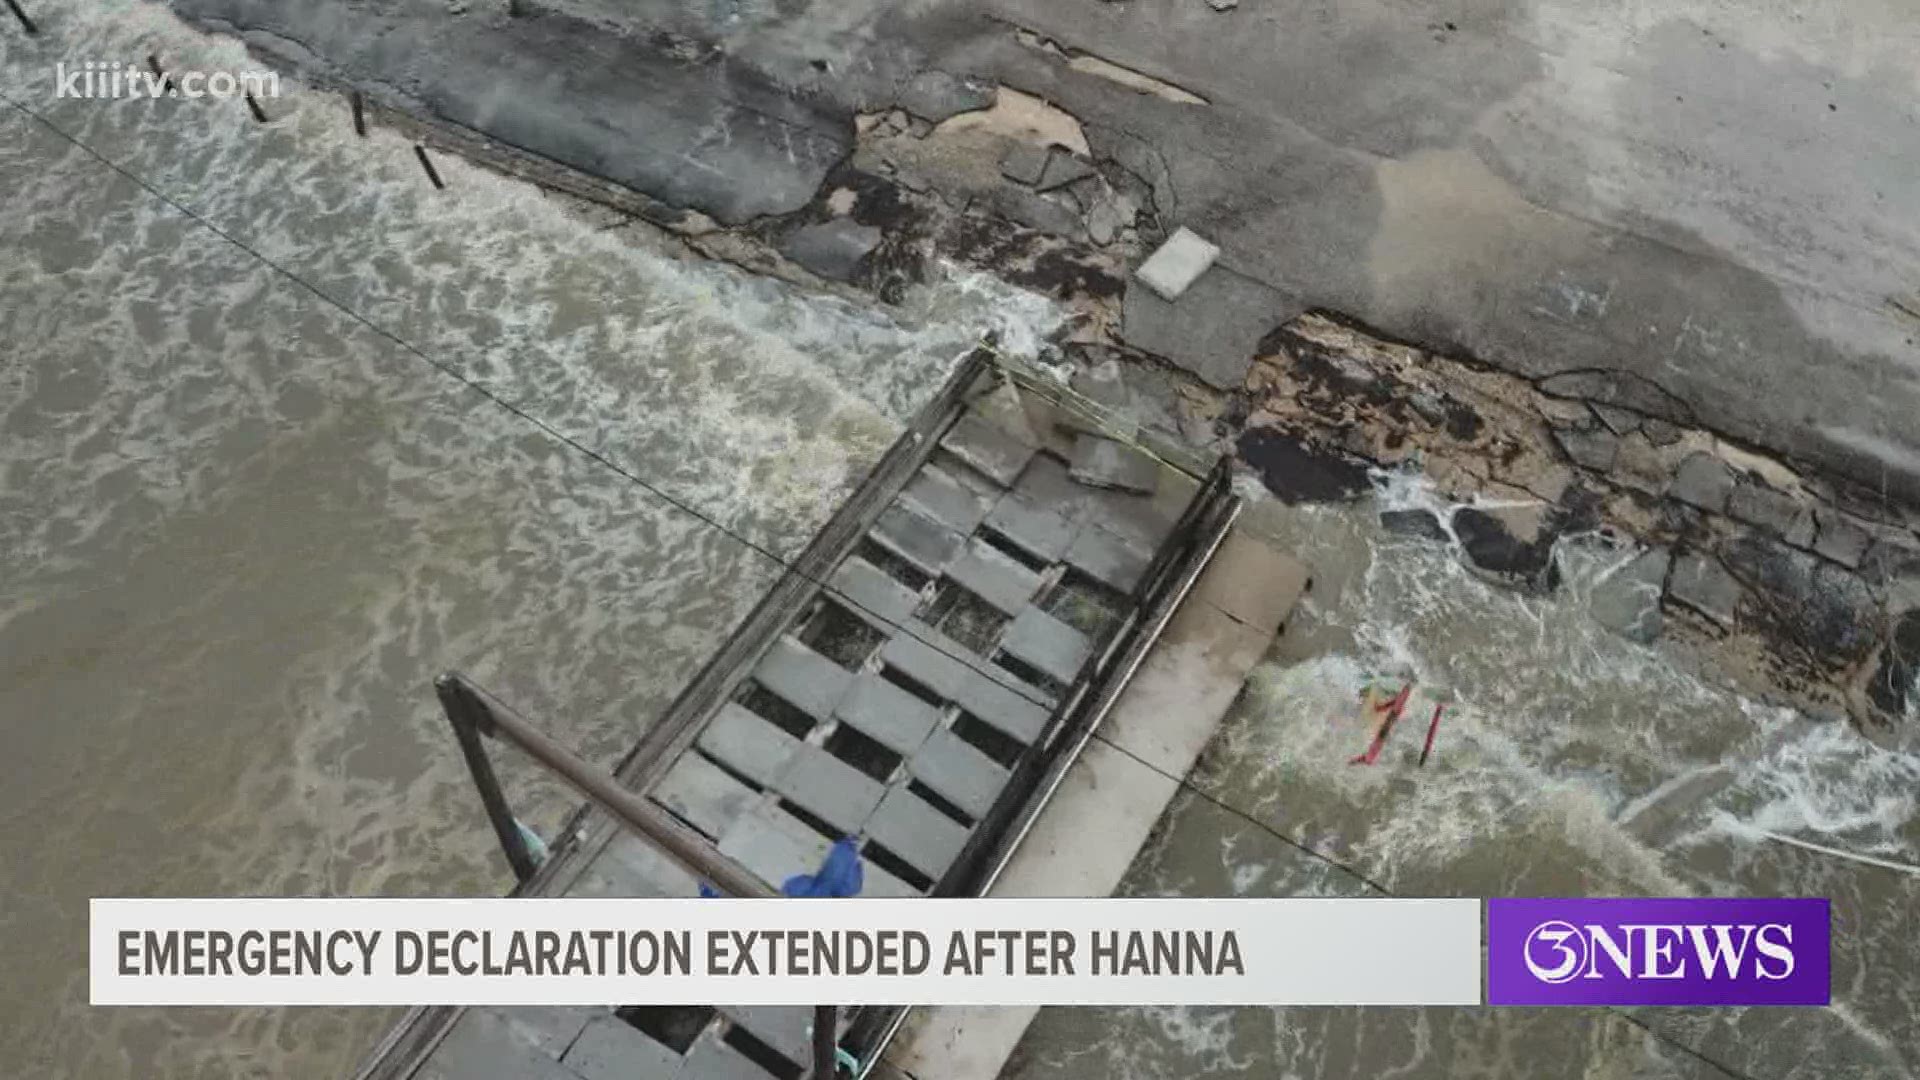 The declaration clears the way for work and reimbursement for cleanup costs related to Hurricane Hanna.